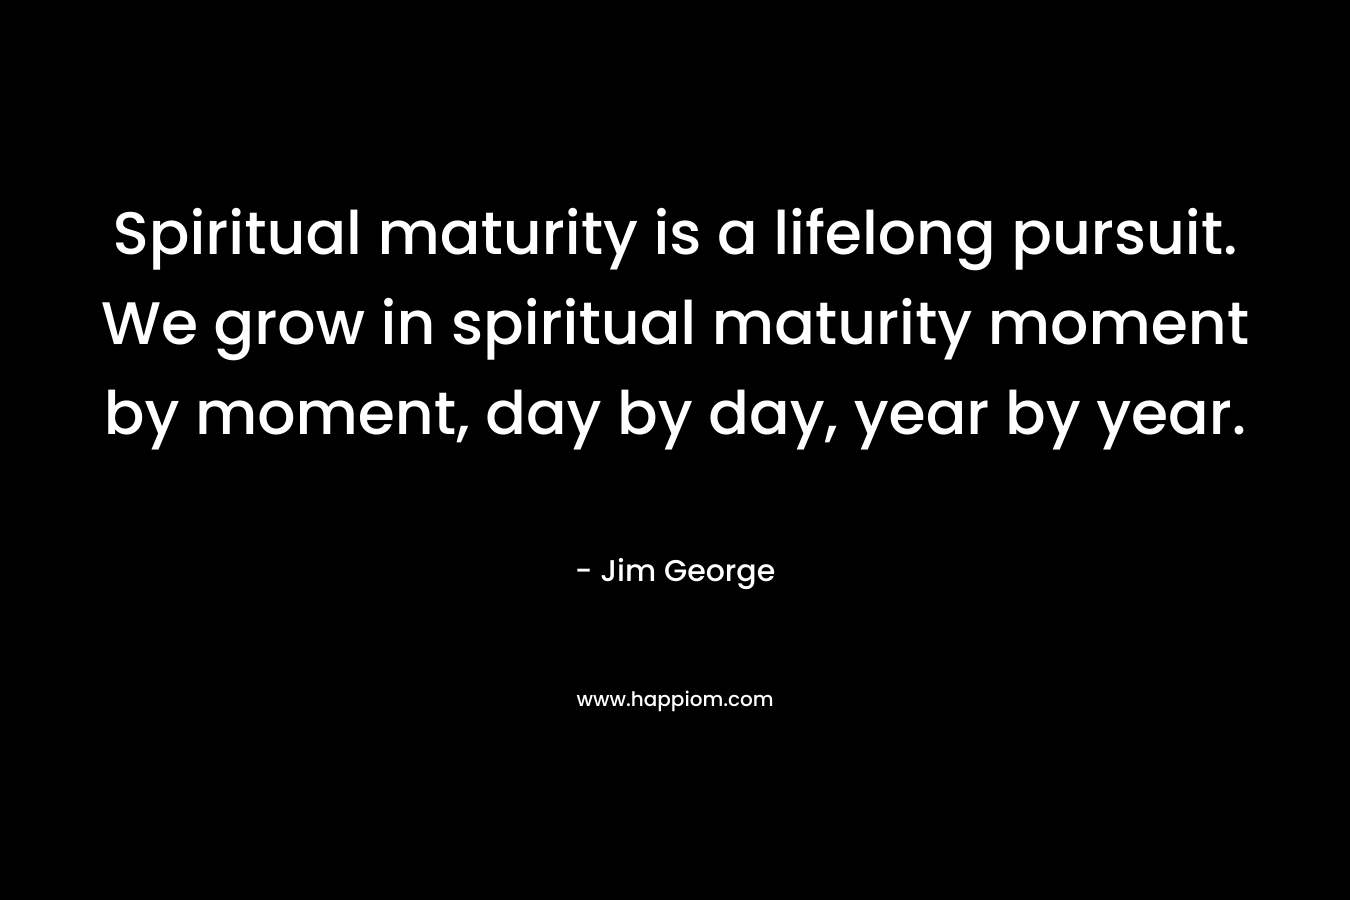 Spiritual maturity is a lifelong pursuit. We grow in spiritual maturity moment by moment, day by day, year by year.